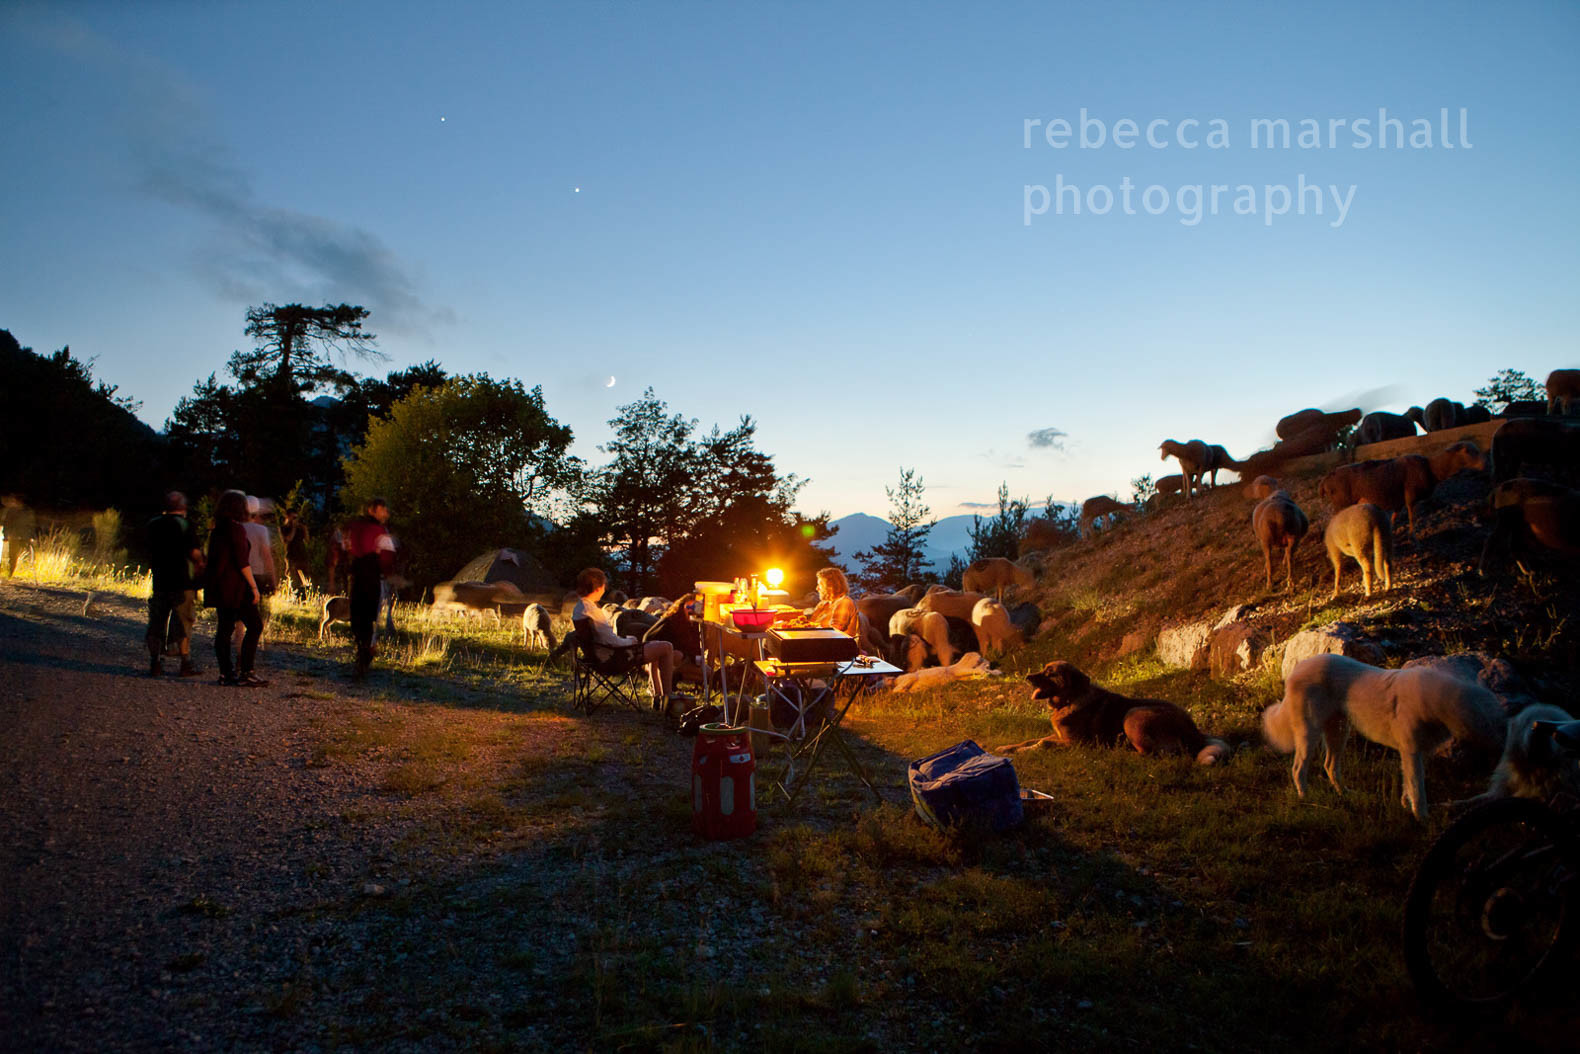 Camp during the transhumance of sheep, dogs & shepherds at twilight